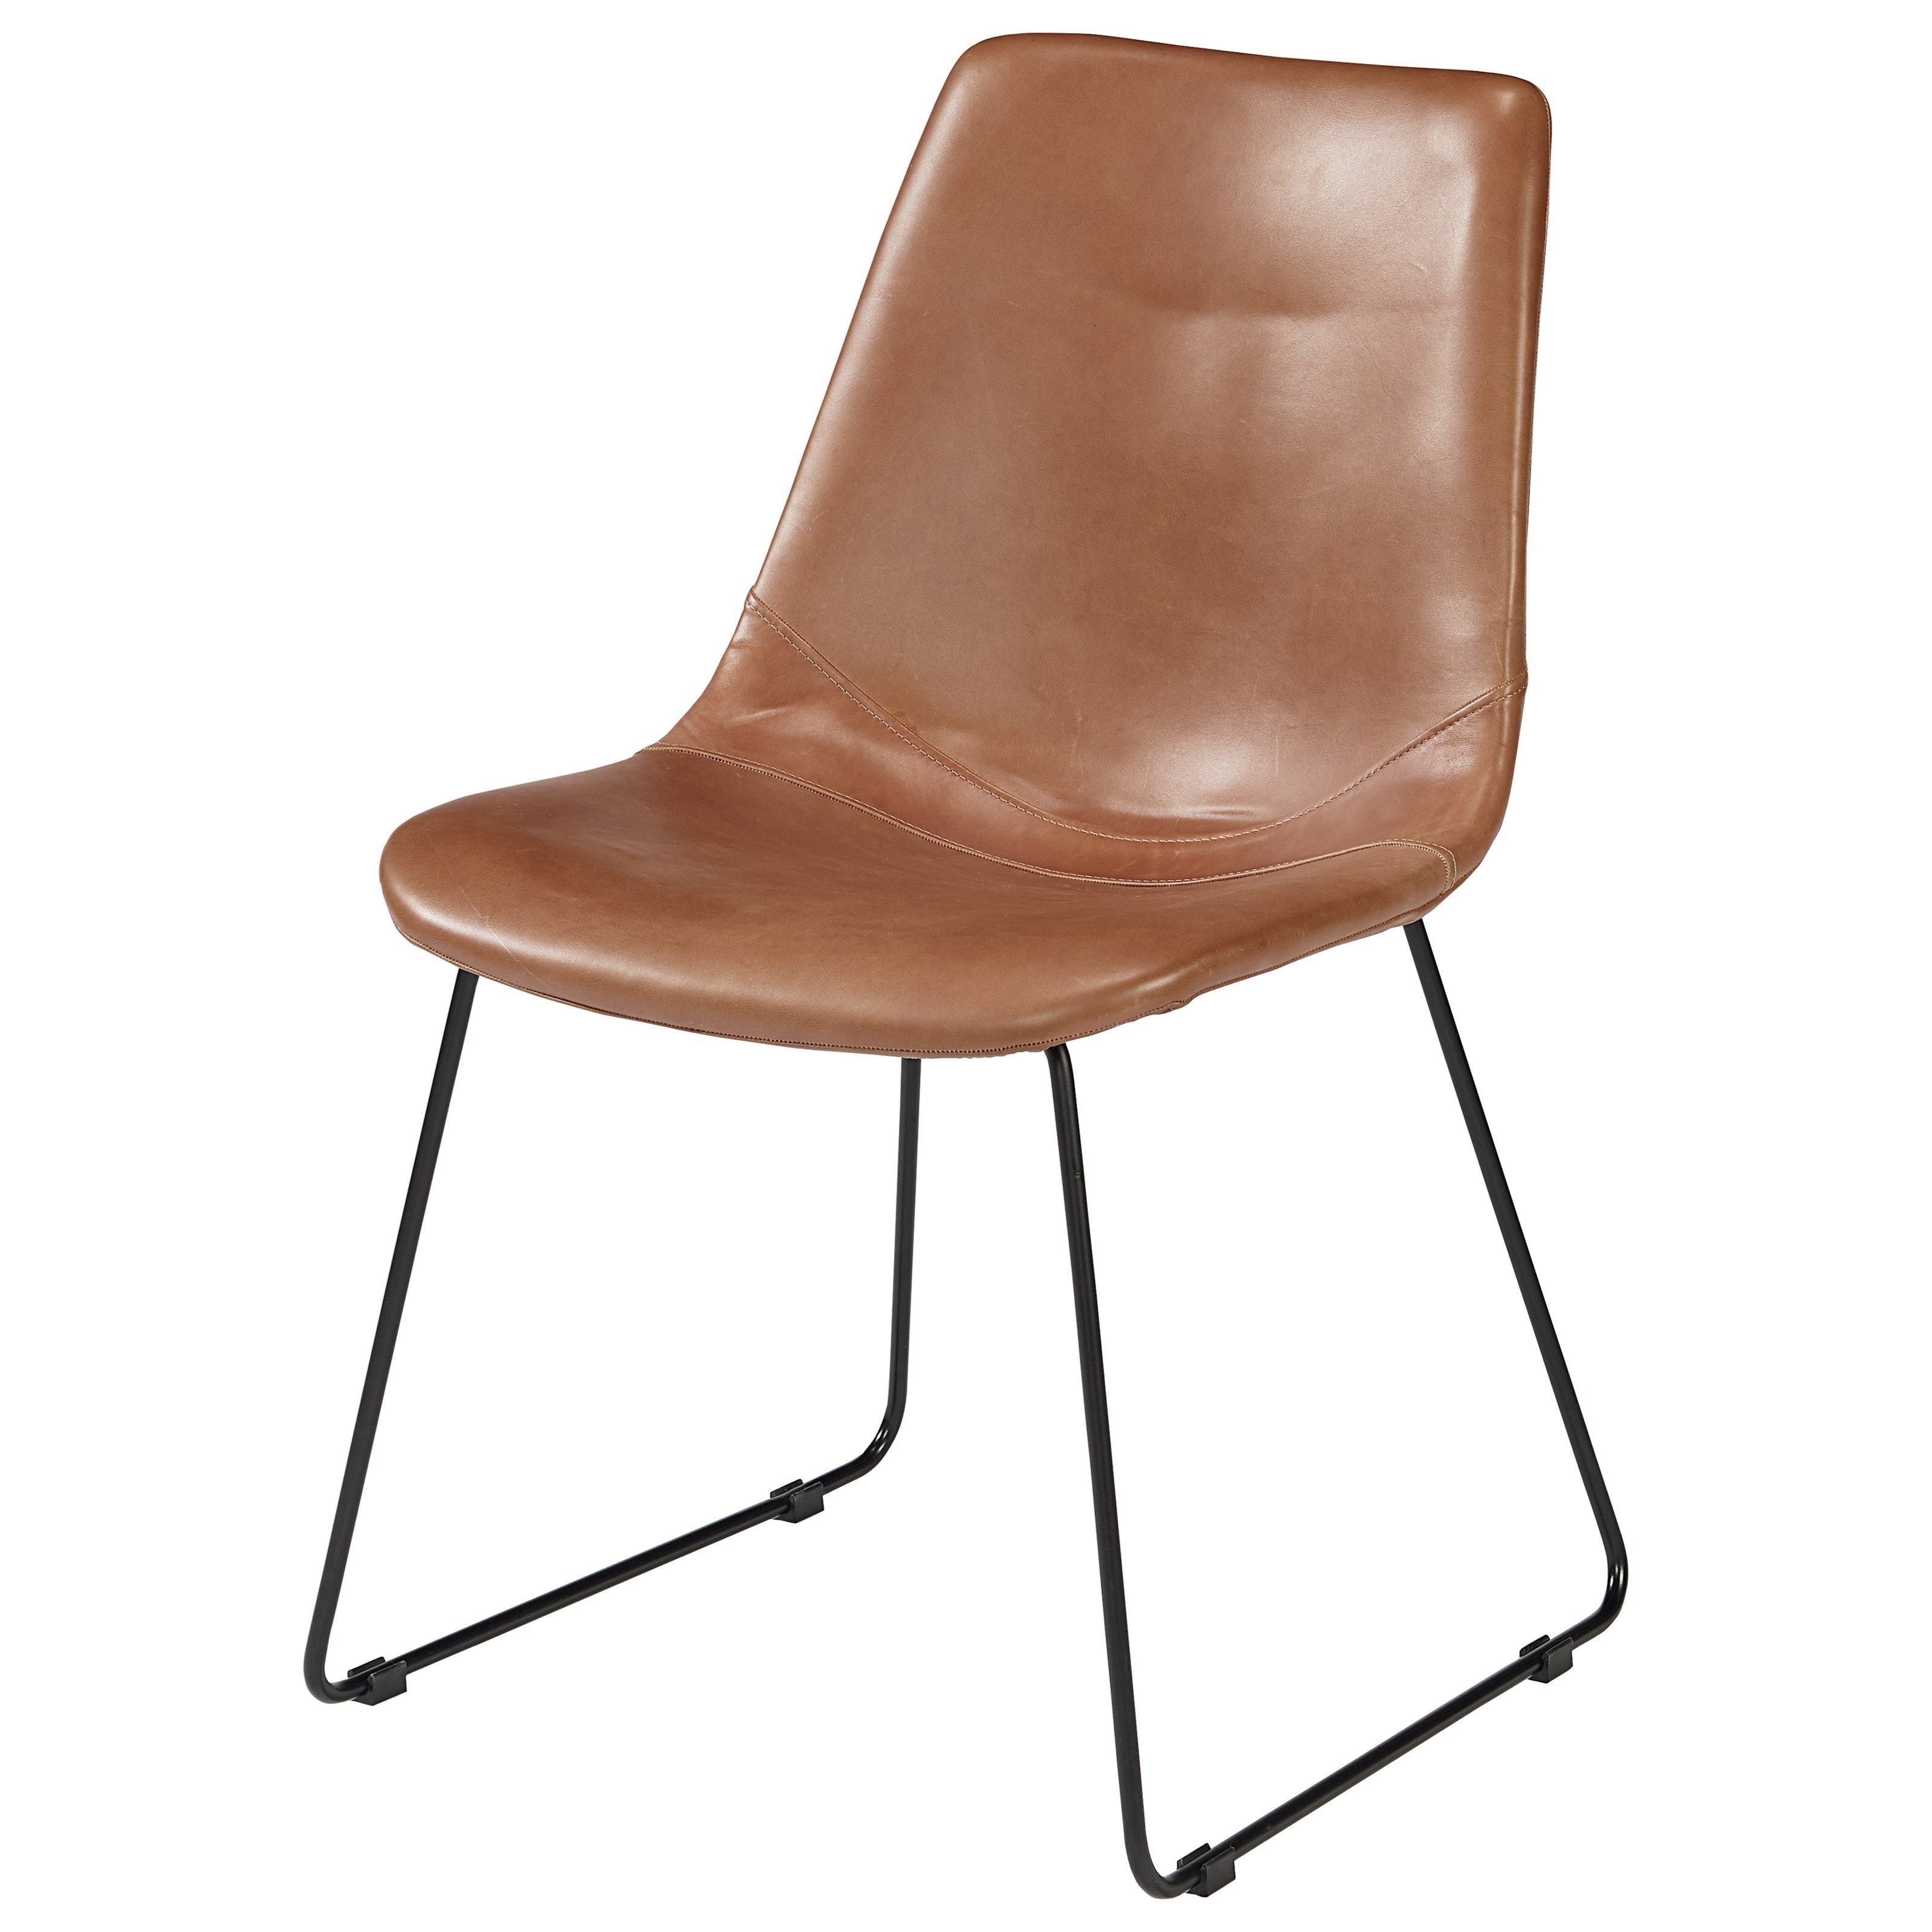 Molded Shell Side Chair With Brown Pu Leather Like Fabric Regarding 2018 Magnolia Home Reed Arm Chairs (View 4 of 20)